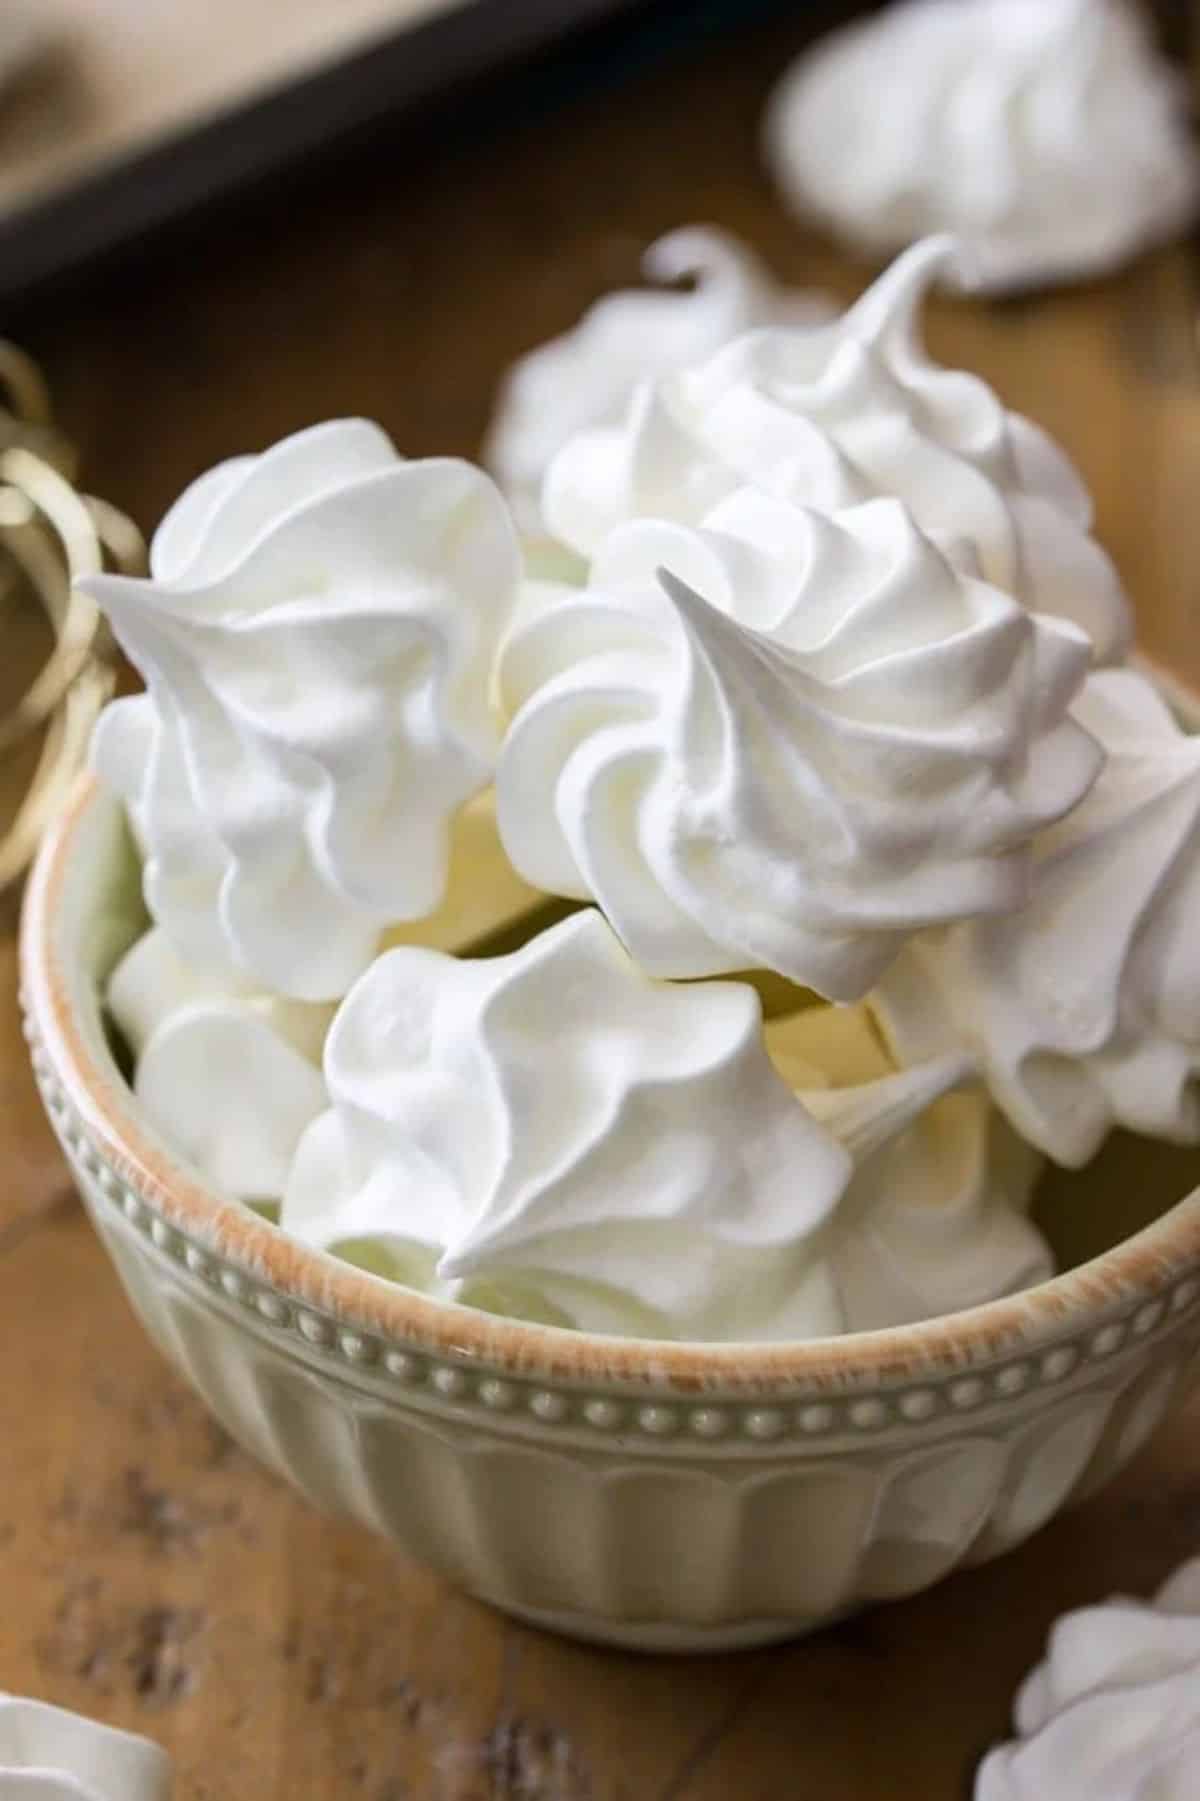 Meringue cookies in a small gray bowl.